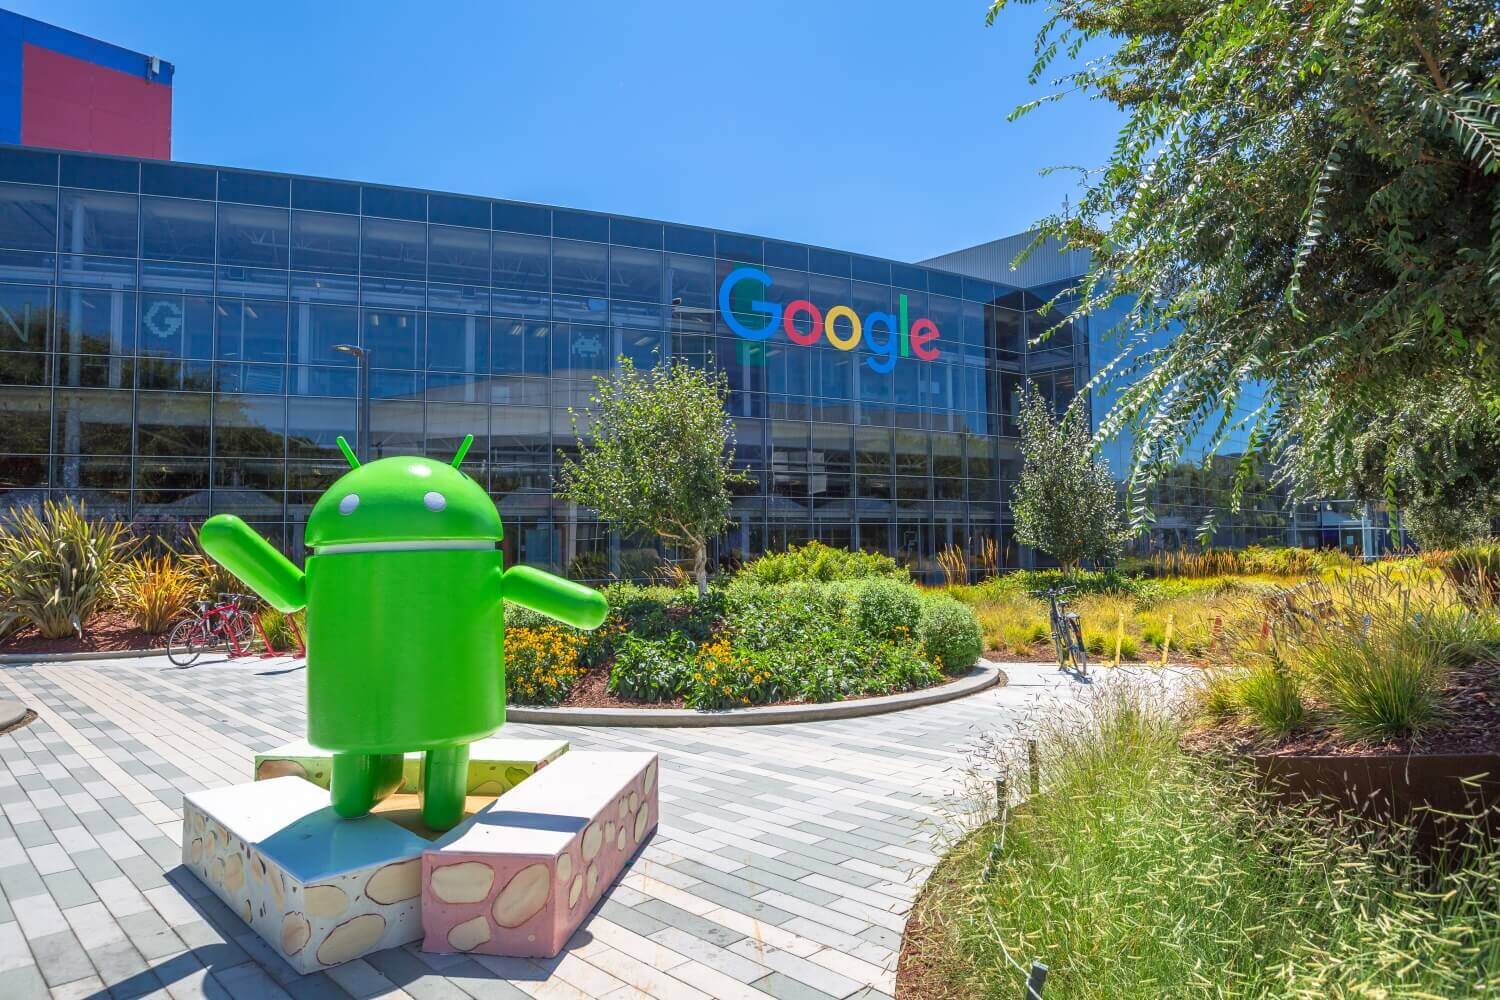 Department of Justice could bring antitrust charges against Google as early as this summer